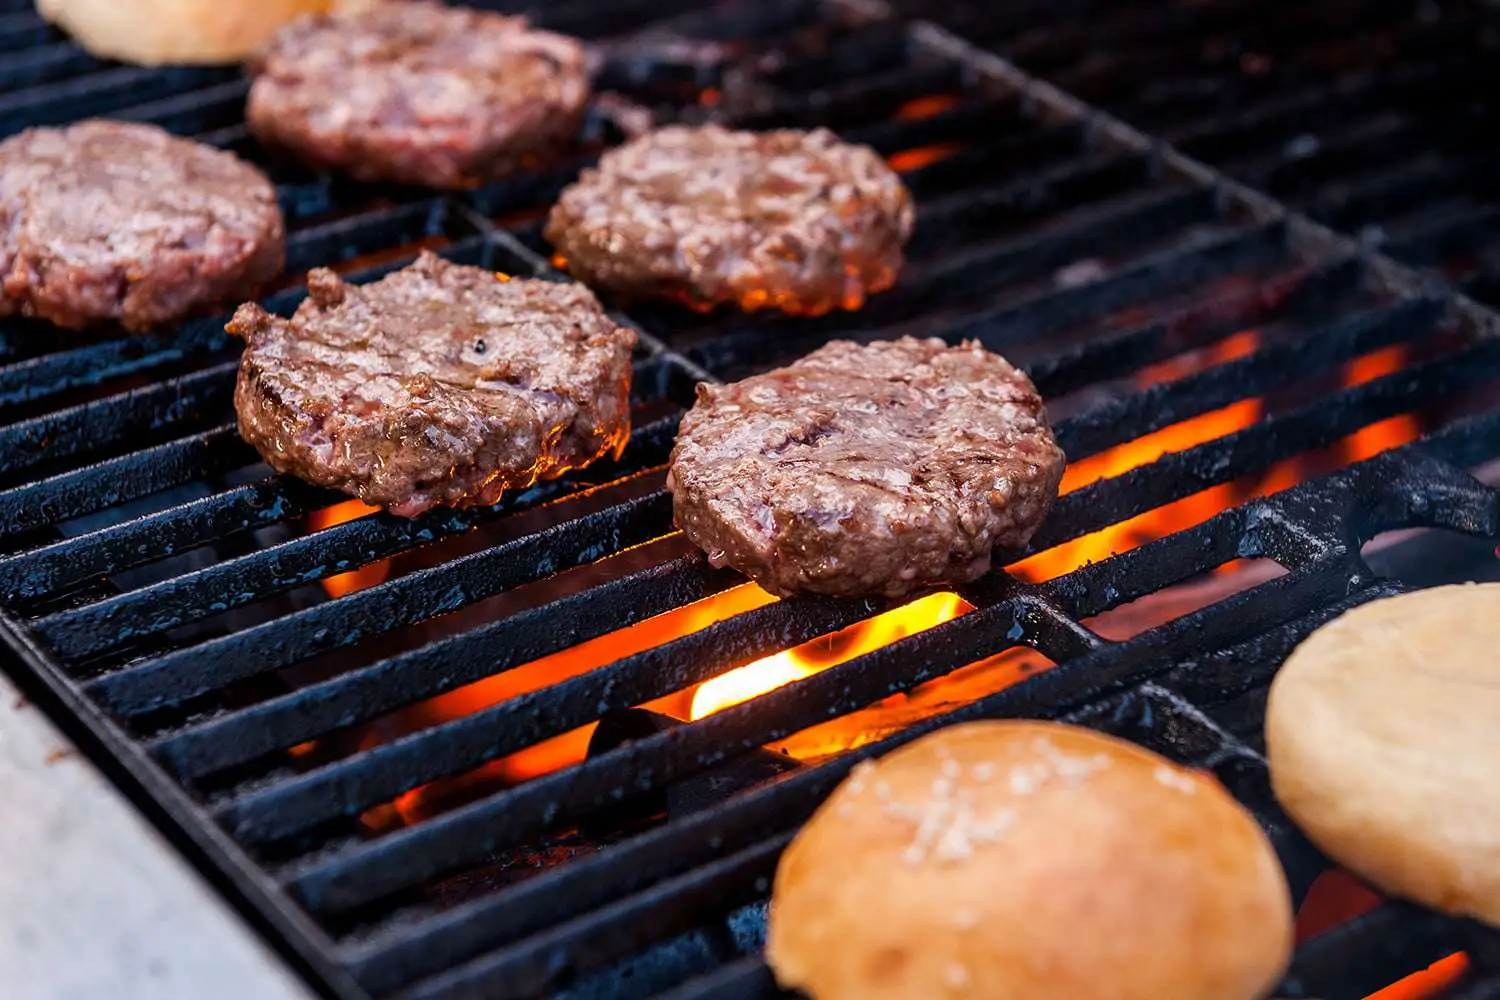 How to Grill a Burger The Right Way Every Time